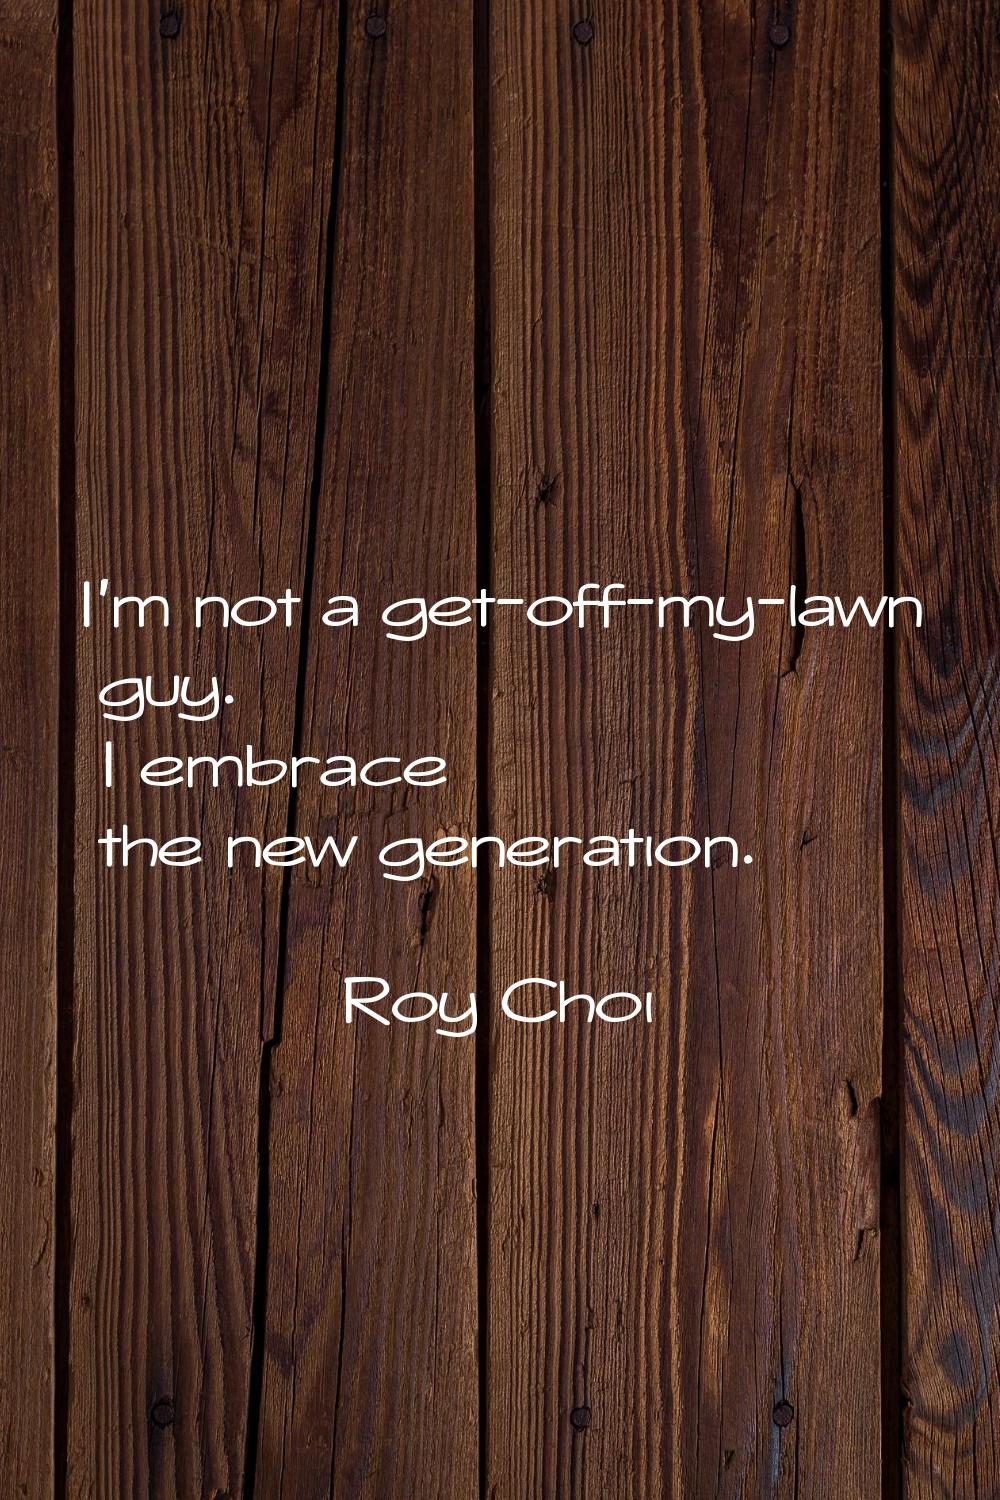 I'm not a get-off-my-lawn guy. I embrace the new generation.